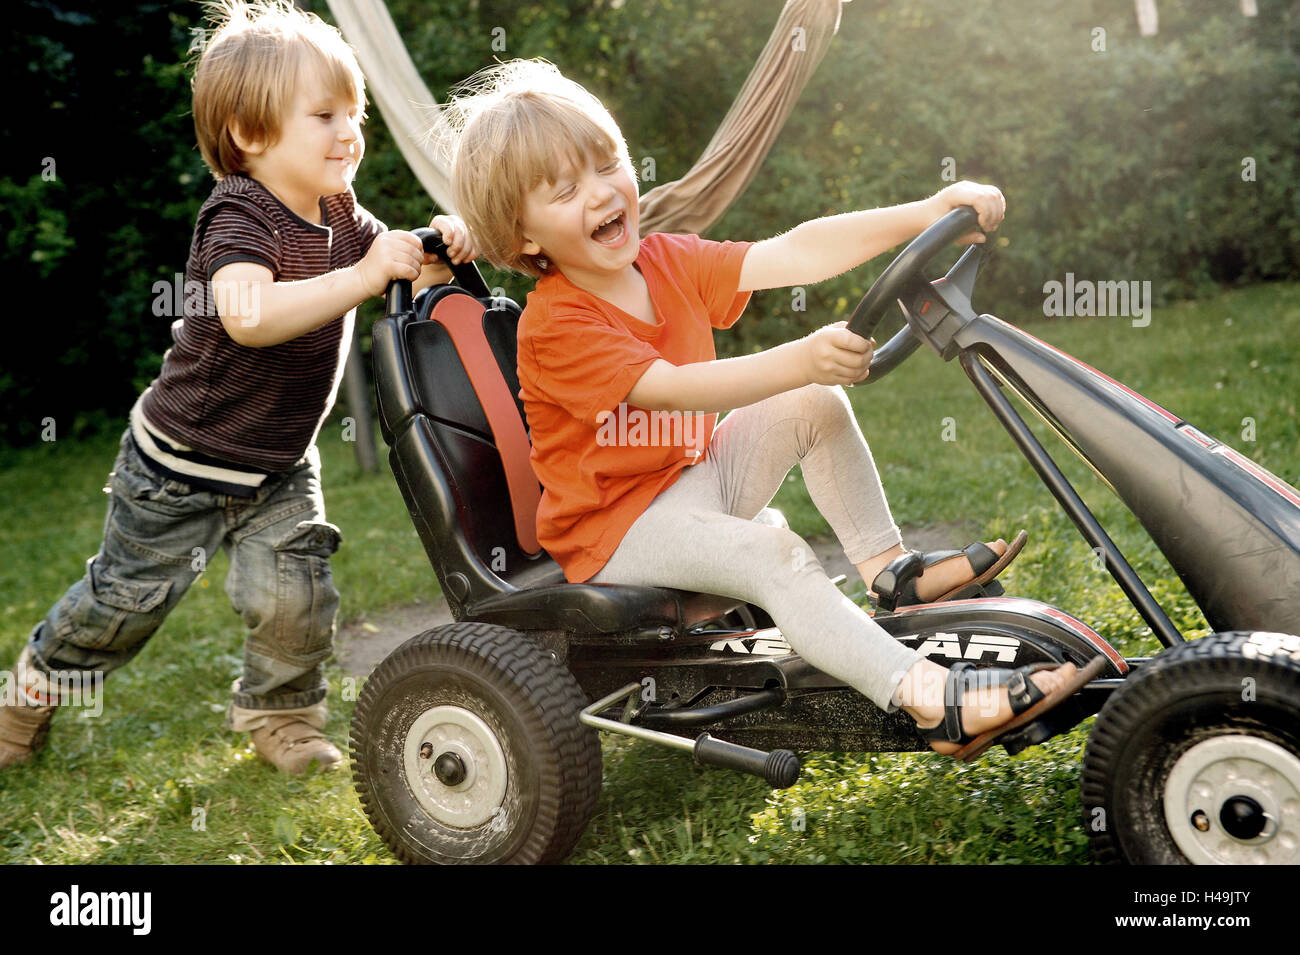 Kettcar High Resolution Stock Photography and Images - Alamy